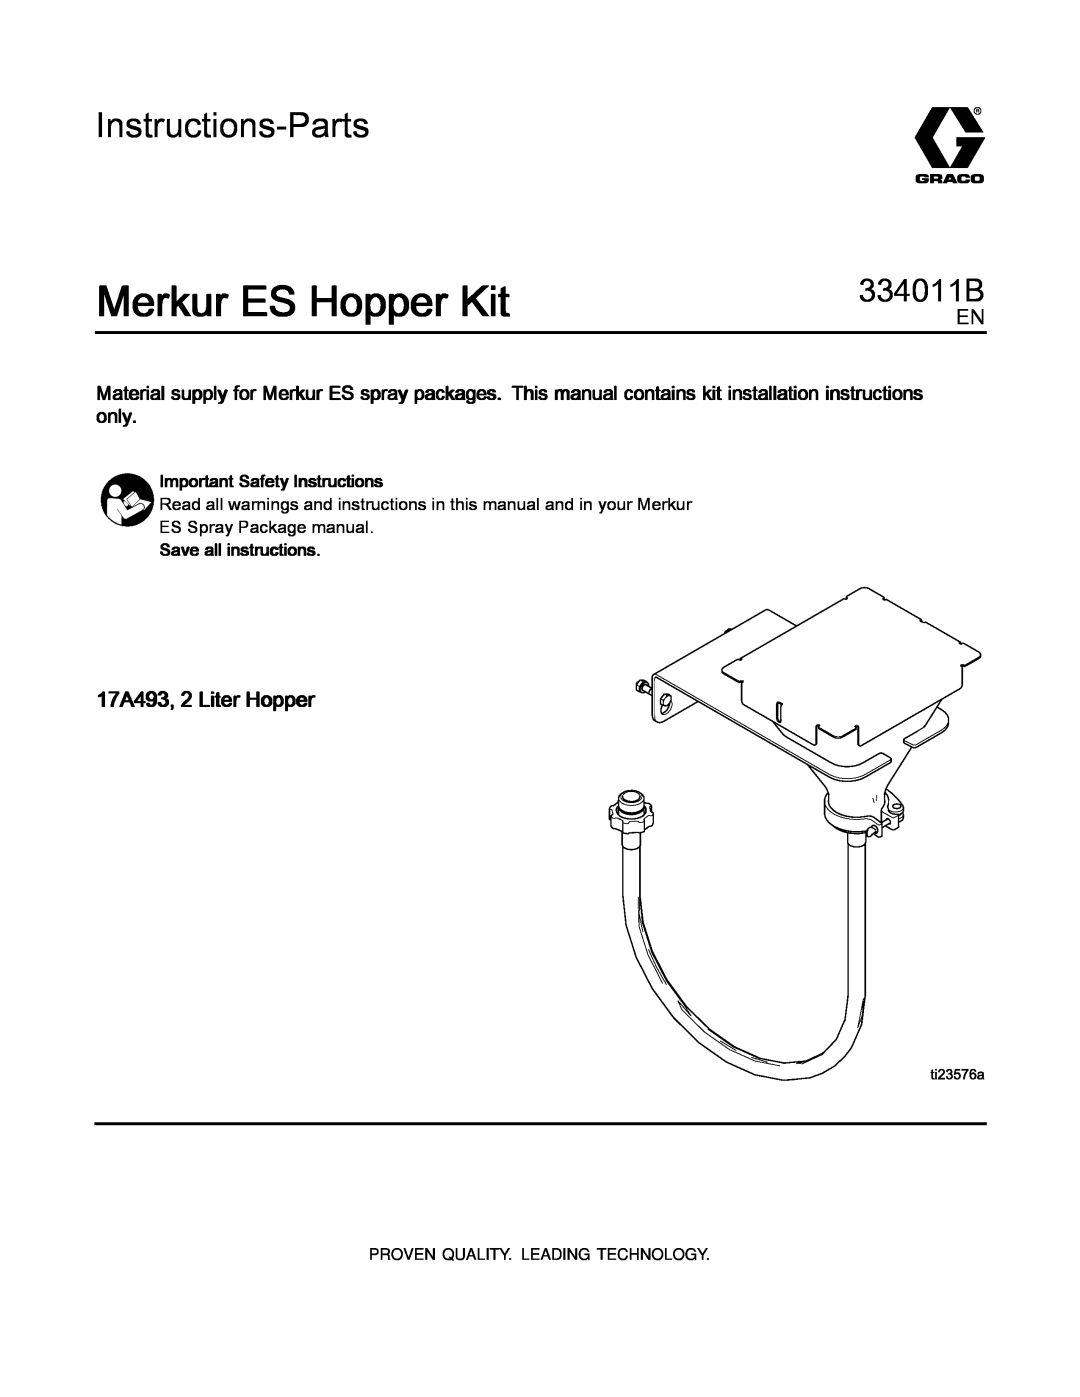 Graco 334011B installation instructions Merkur ES Hopper Kit, Important Safety Instructions, Save all instructions 